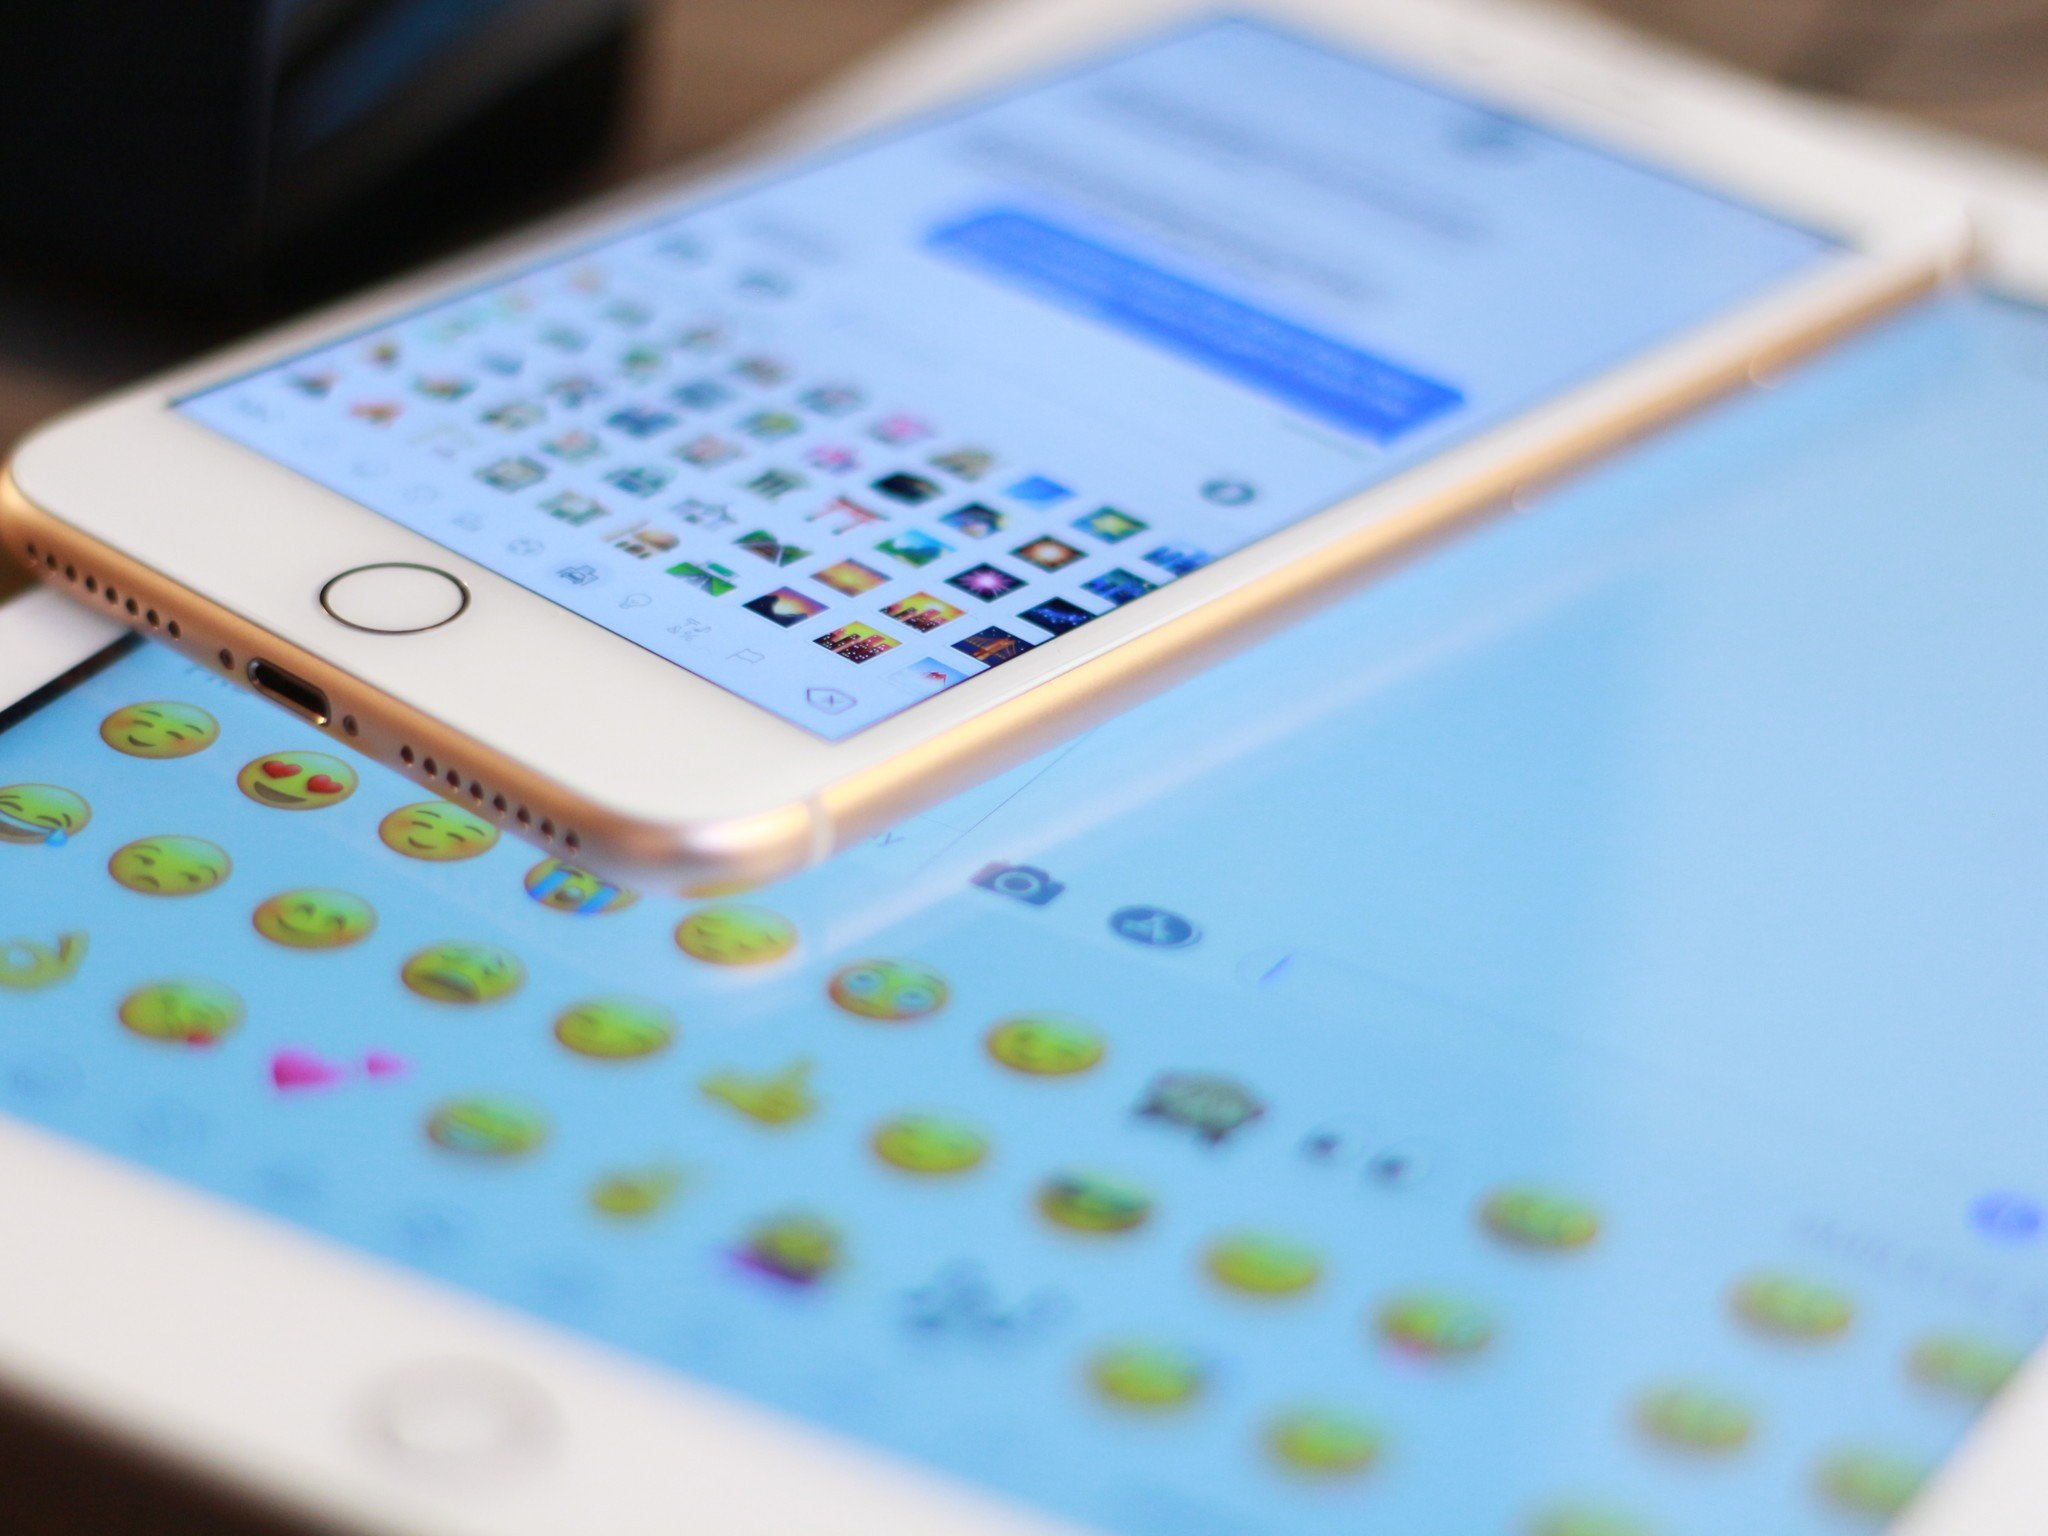 How to use emoji on your iPhone or iPad